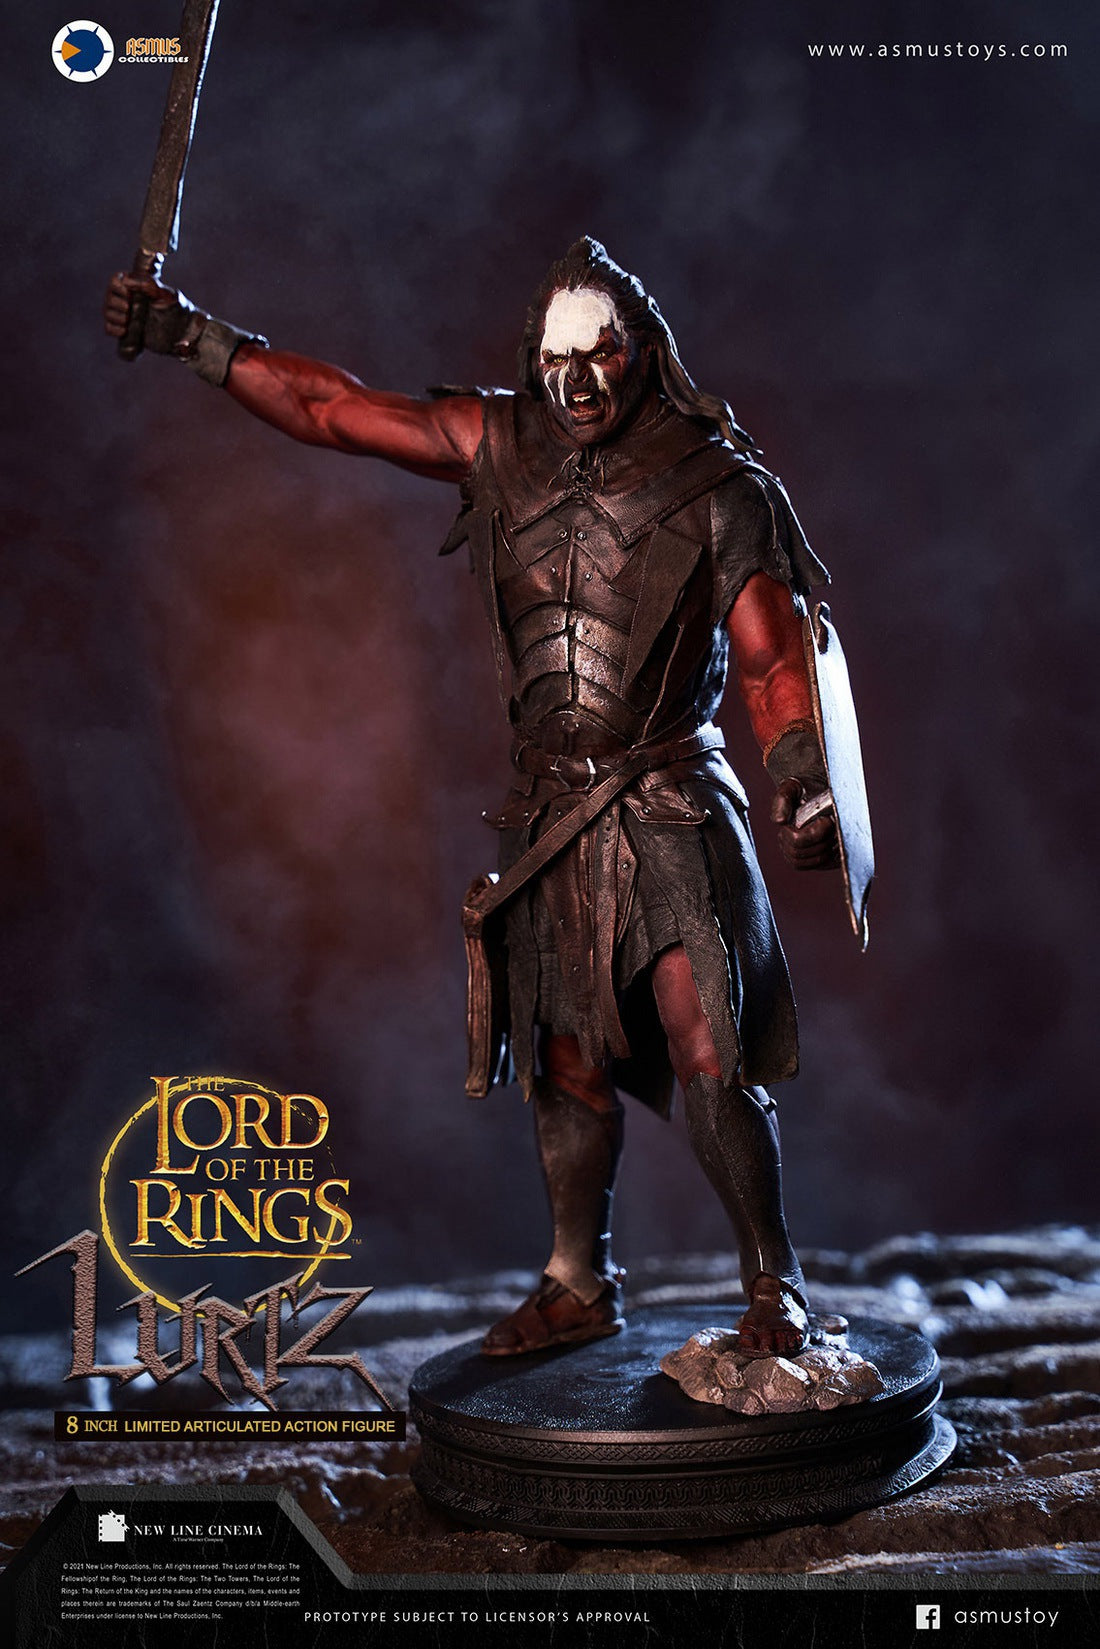 Asmus Toys LOTR8IN003 - The Lord of the Rings - Lurtz